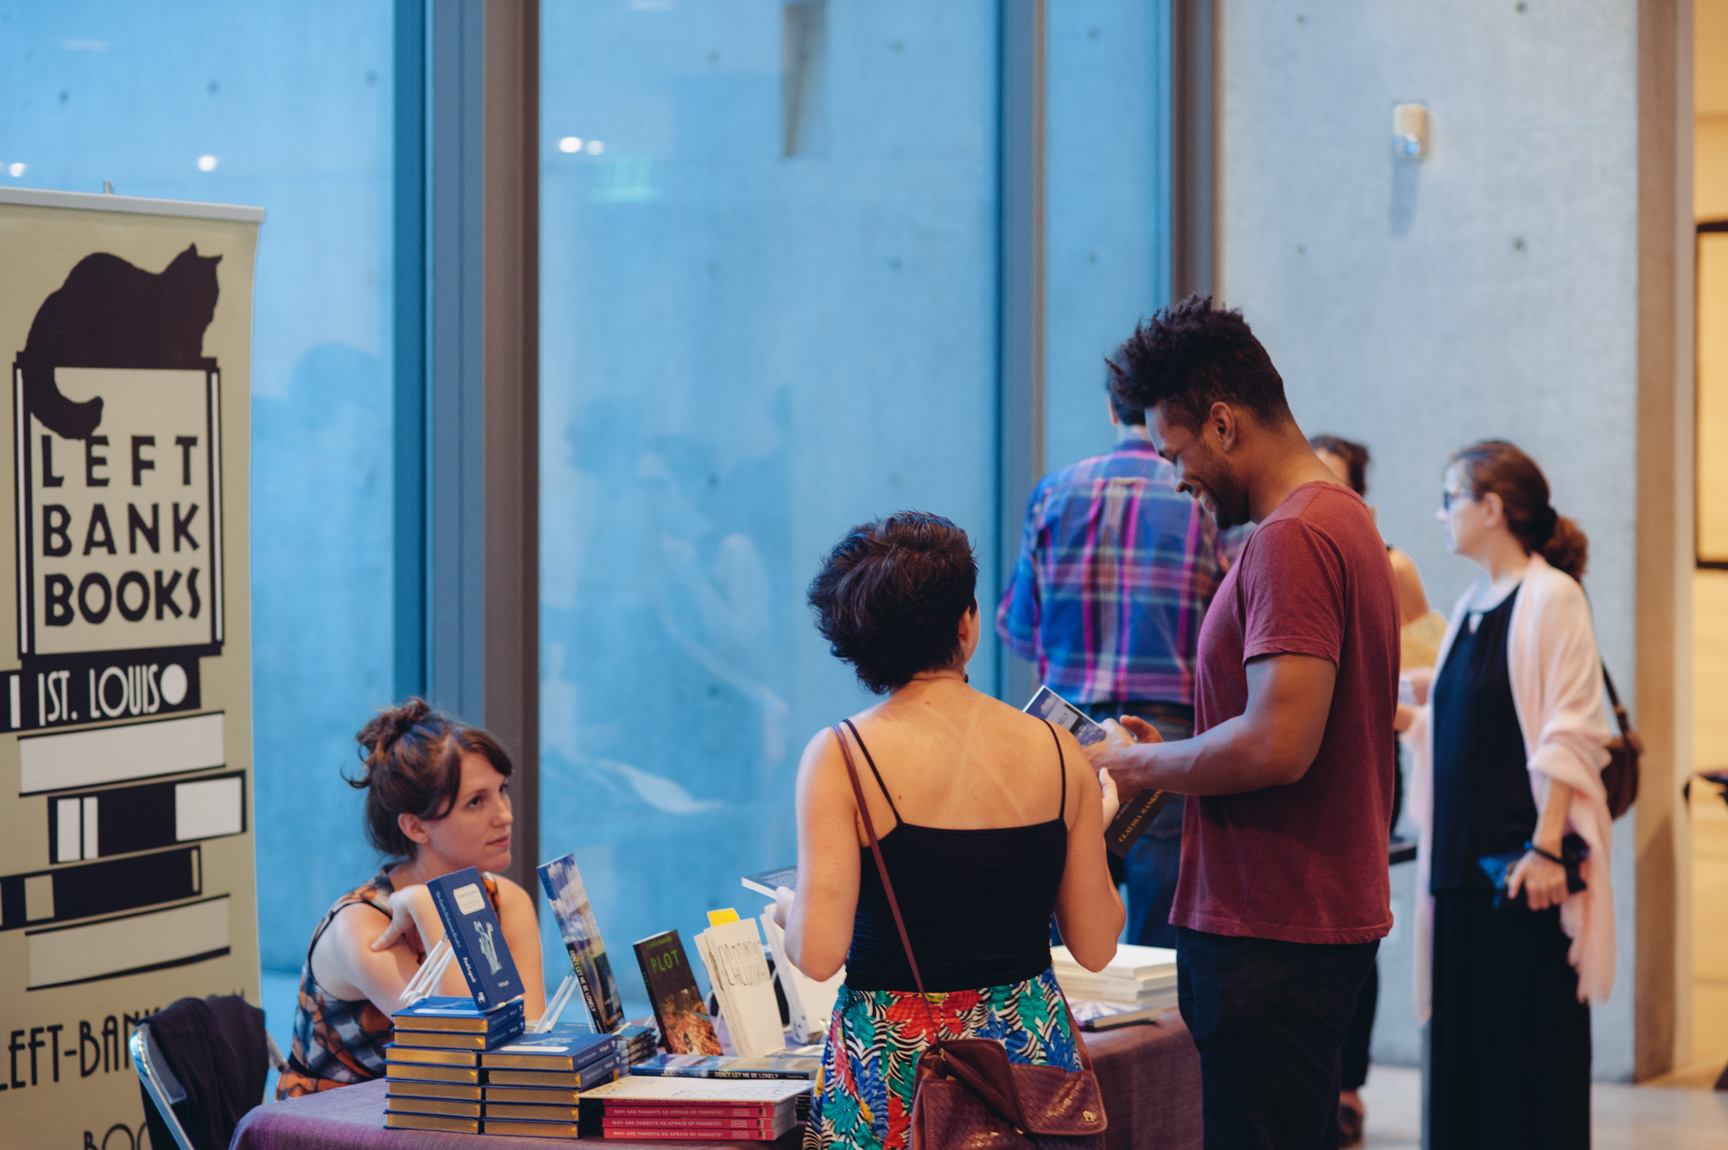 Visitors stop to look at books from a vendor table for Left Bank Books in front of the Water Court windows.